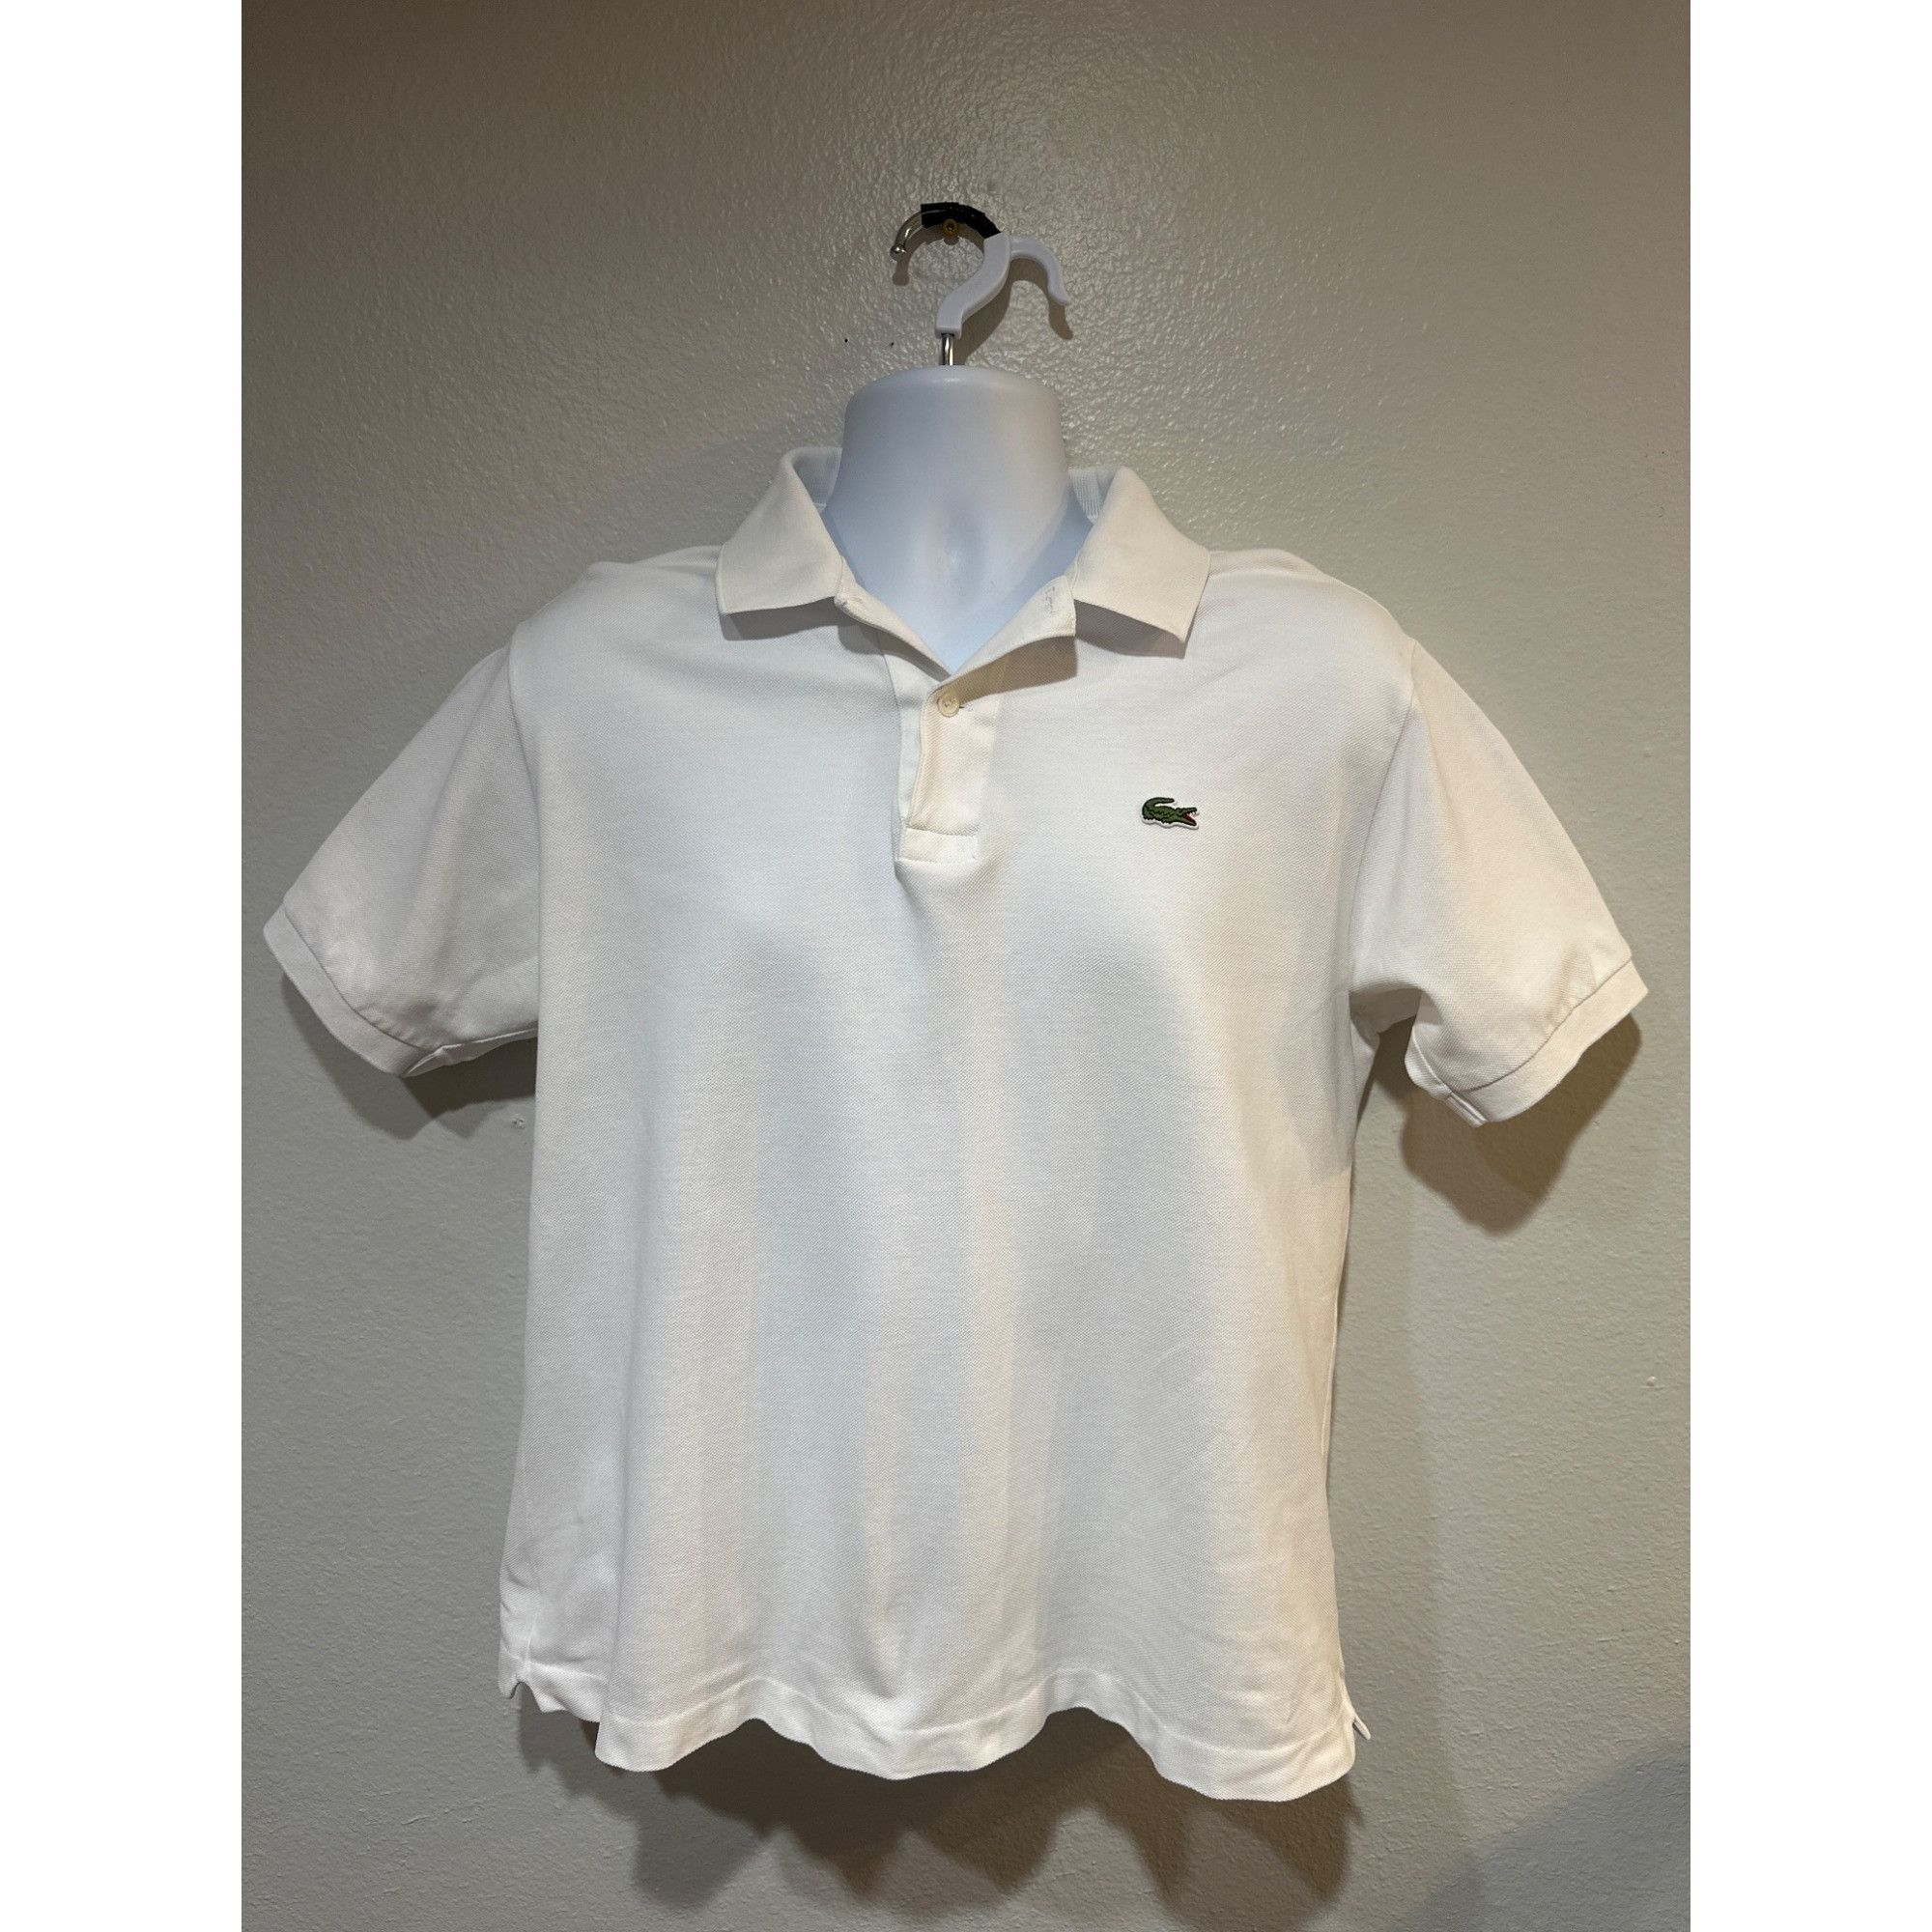 Lacoste Lacoste Lg White Polo Shirt | Grailed